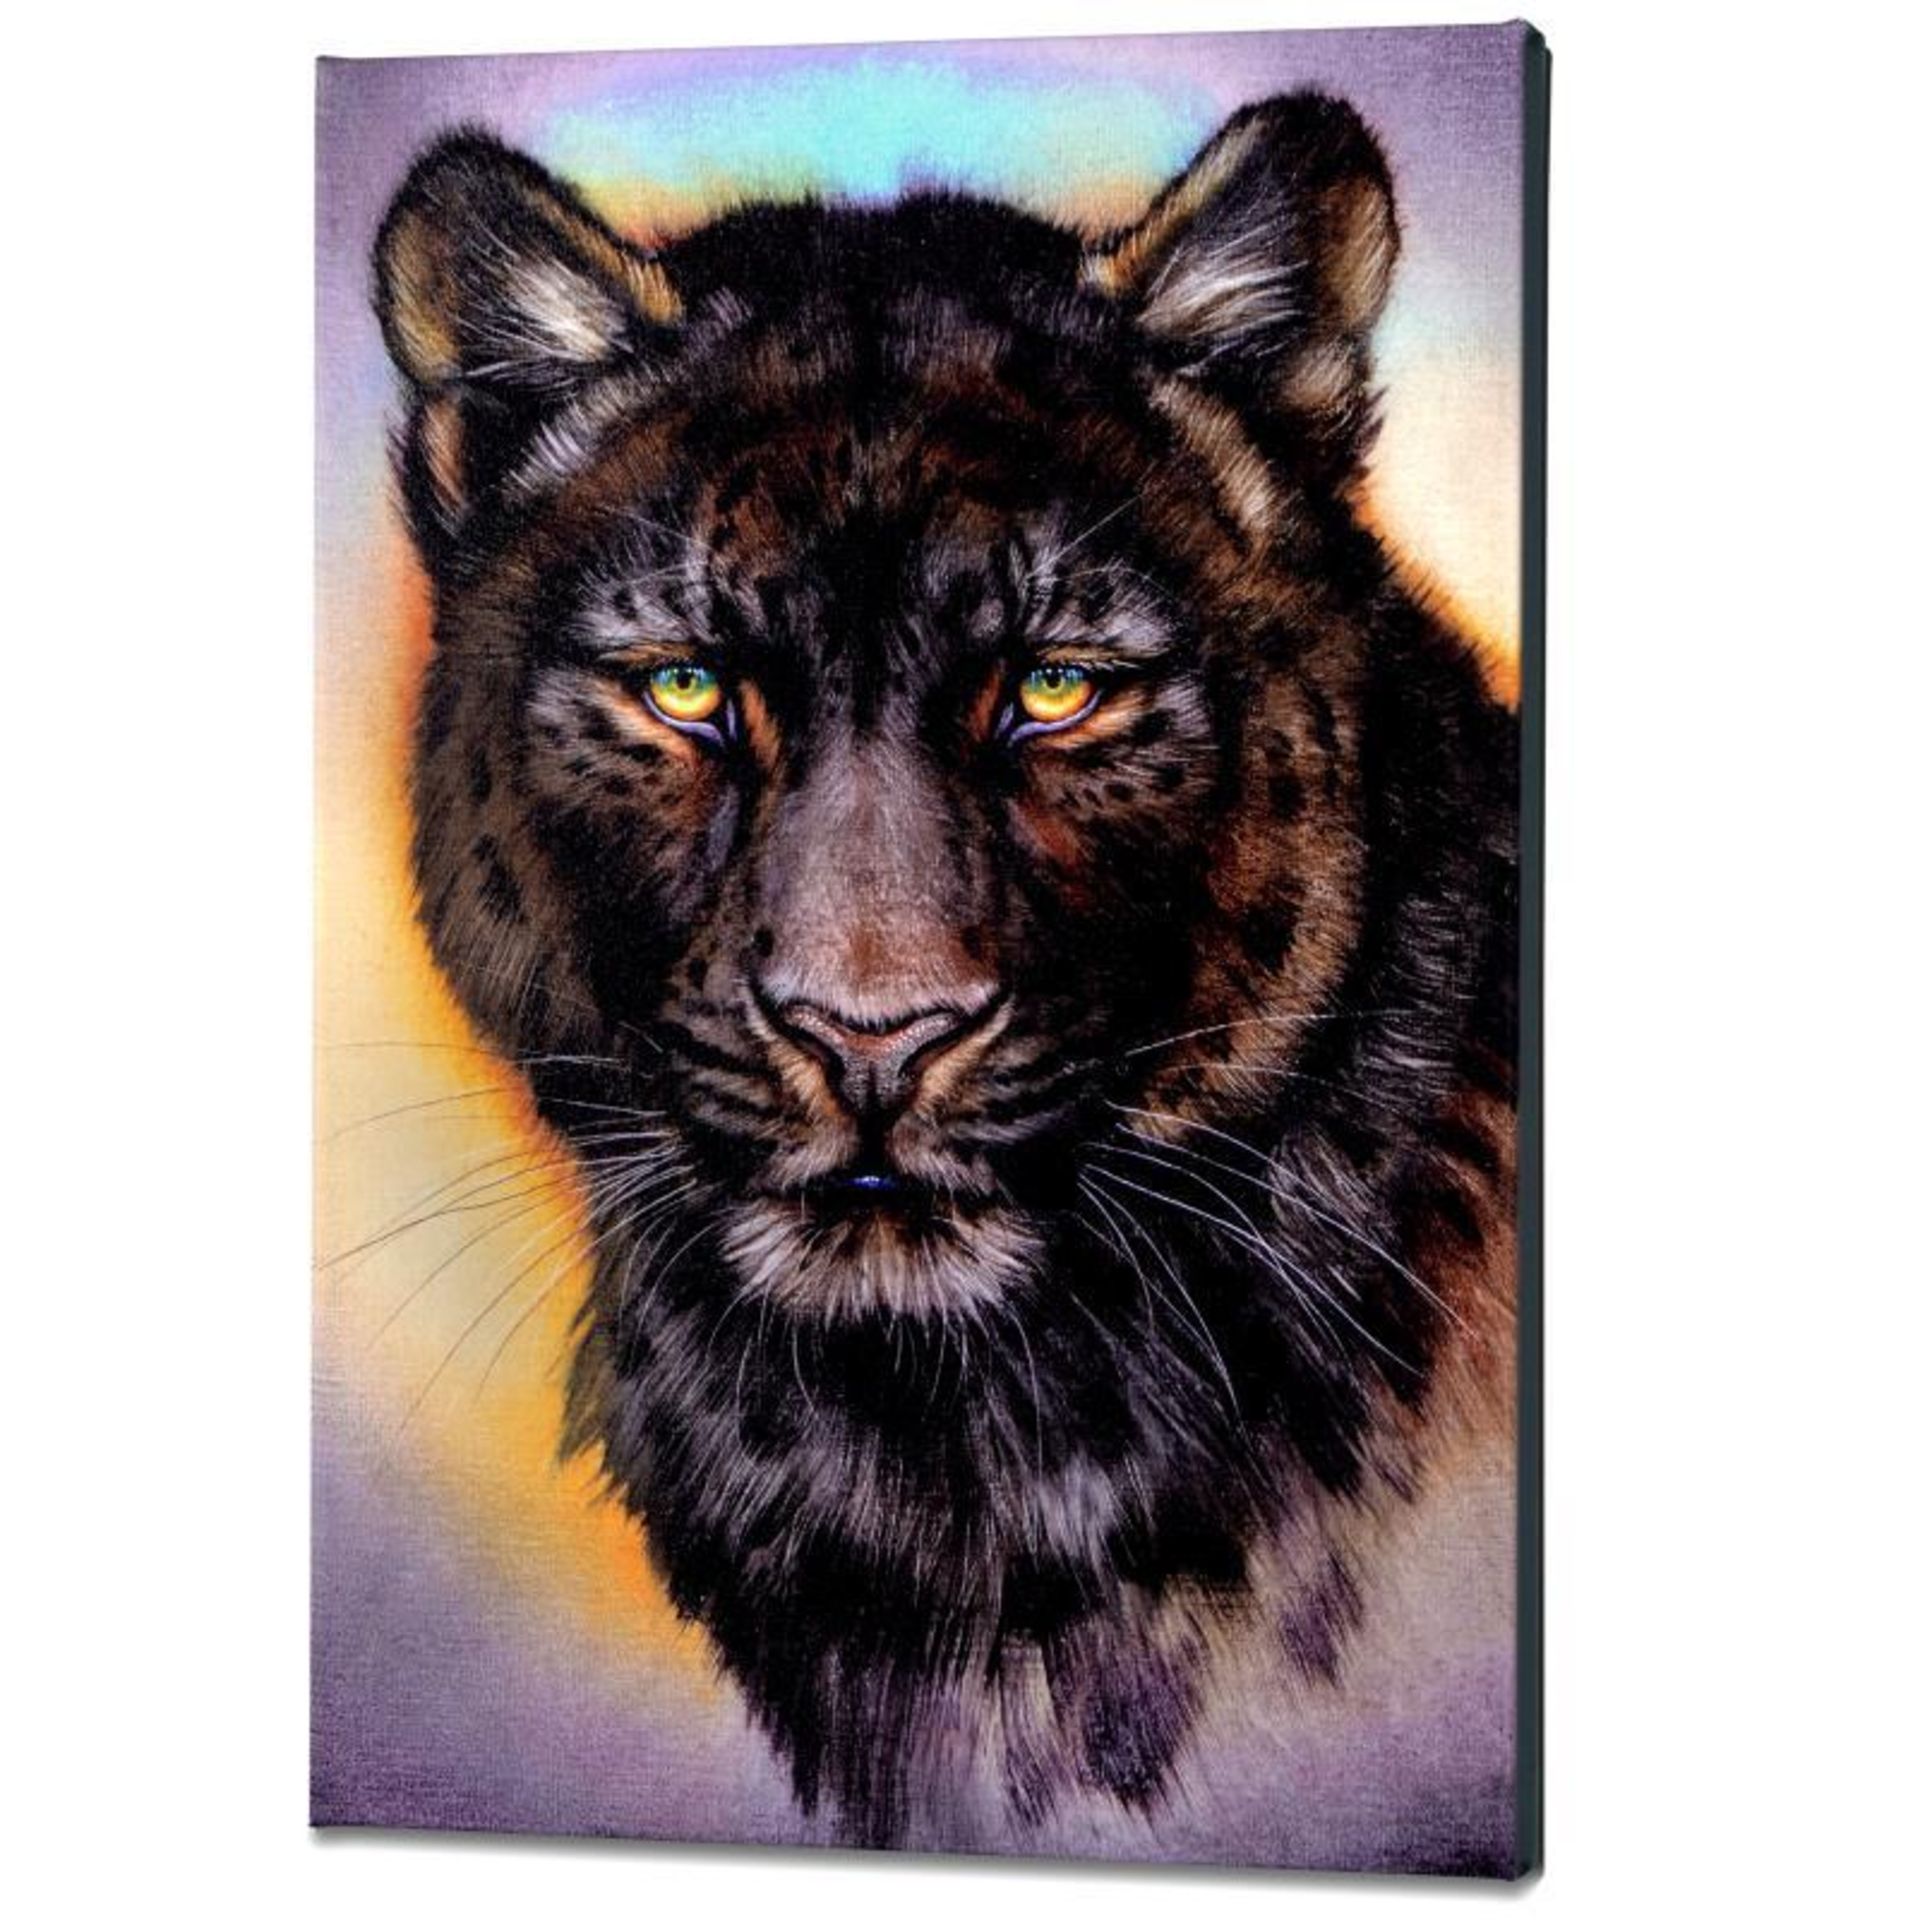 "Black Phase Leopard" Limited Edition Giclee on Canvas by Martin Katon, Numbered - Image 2 of 2